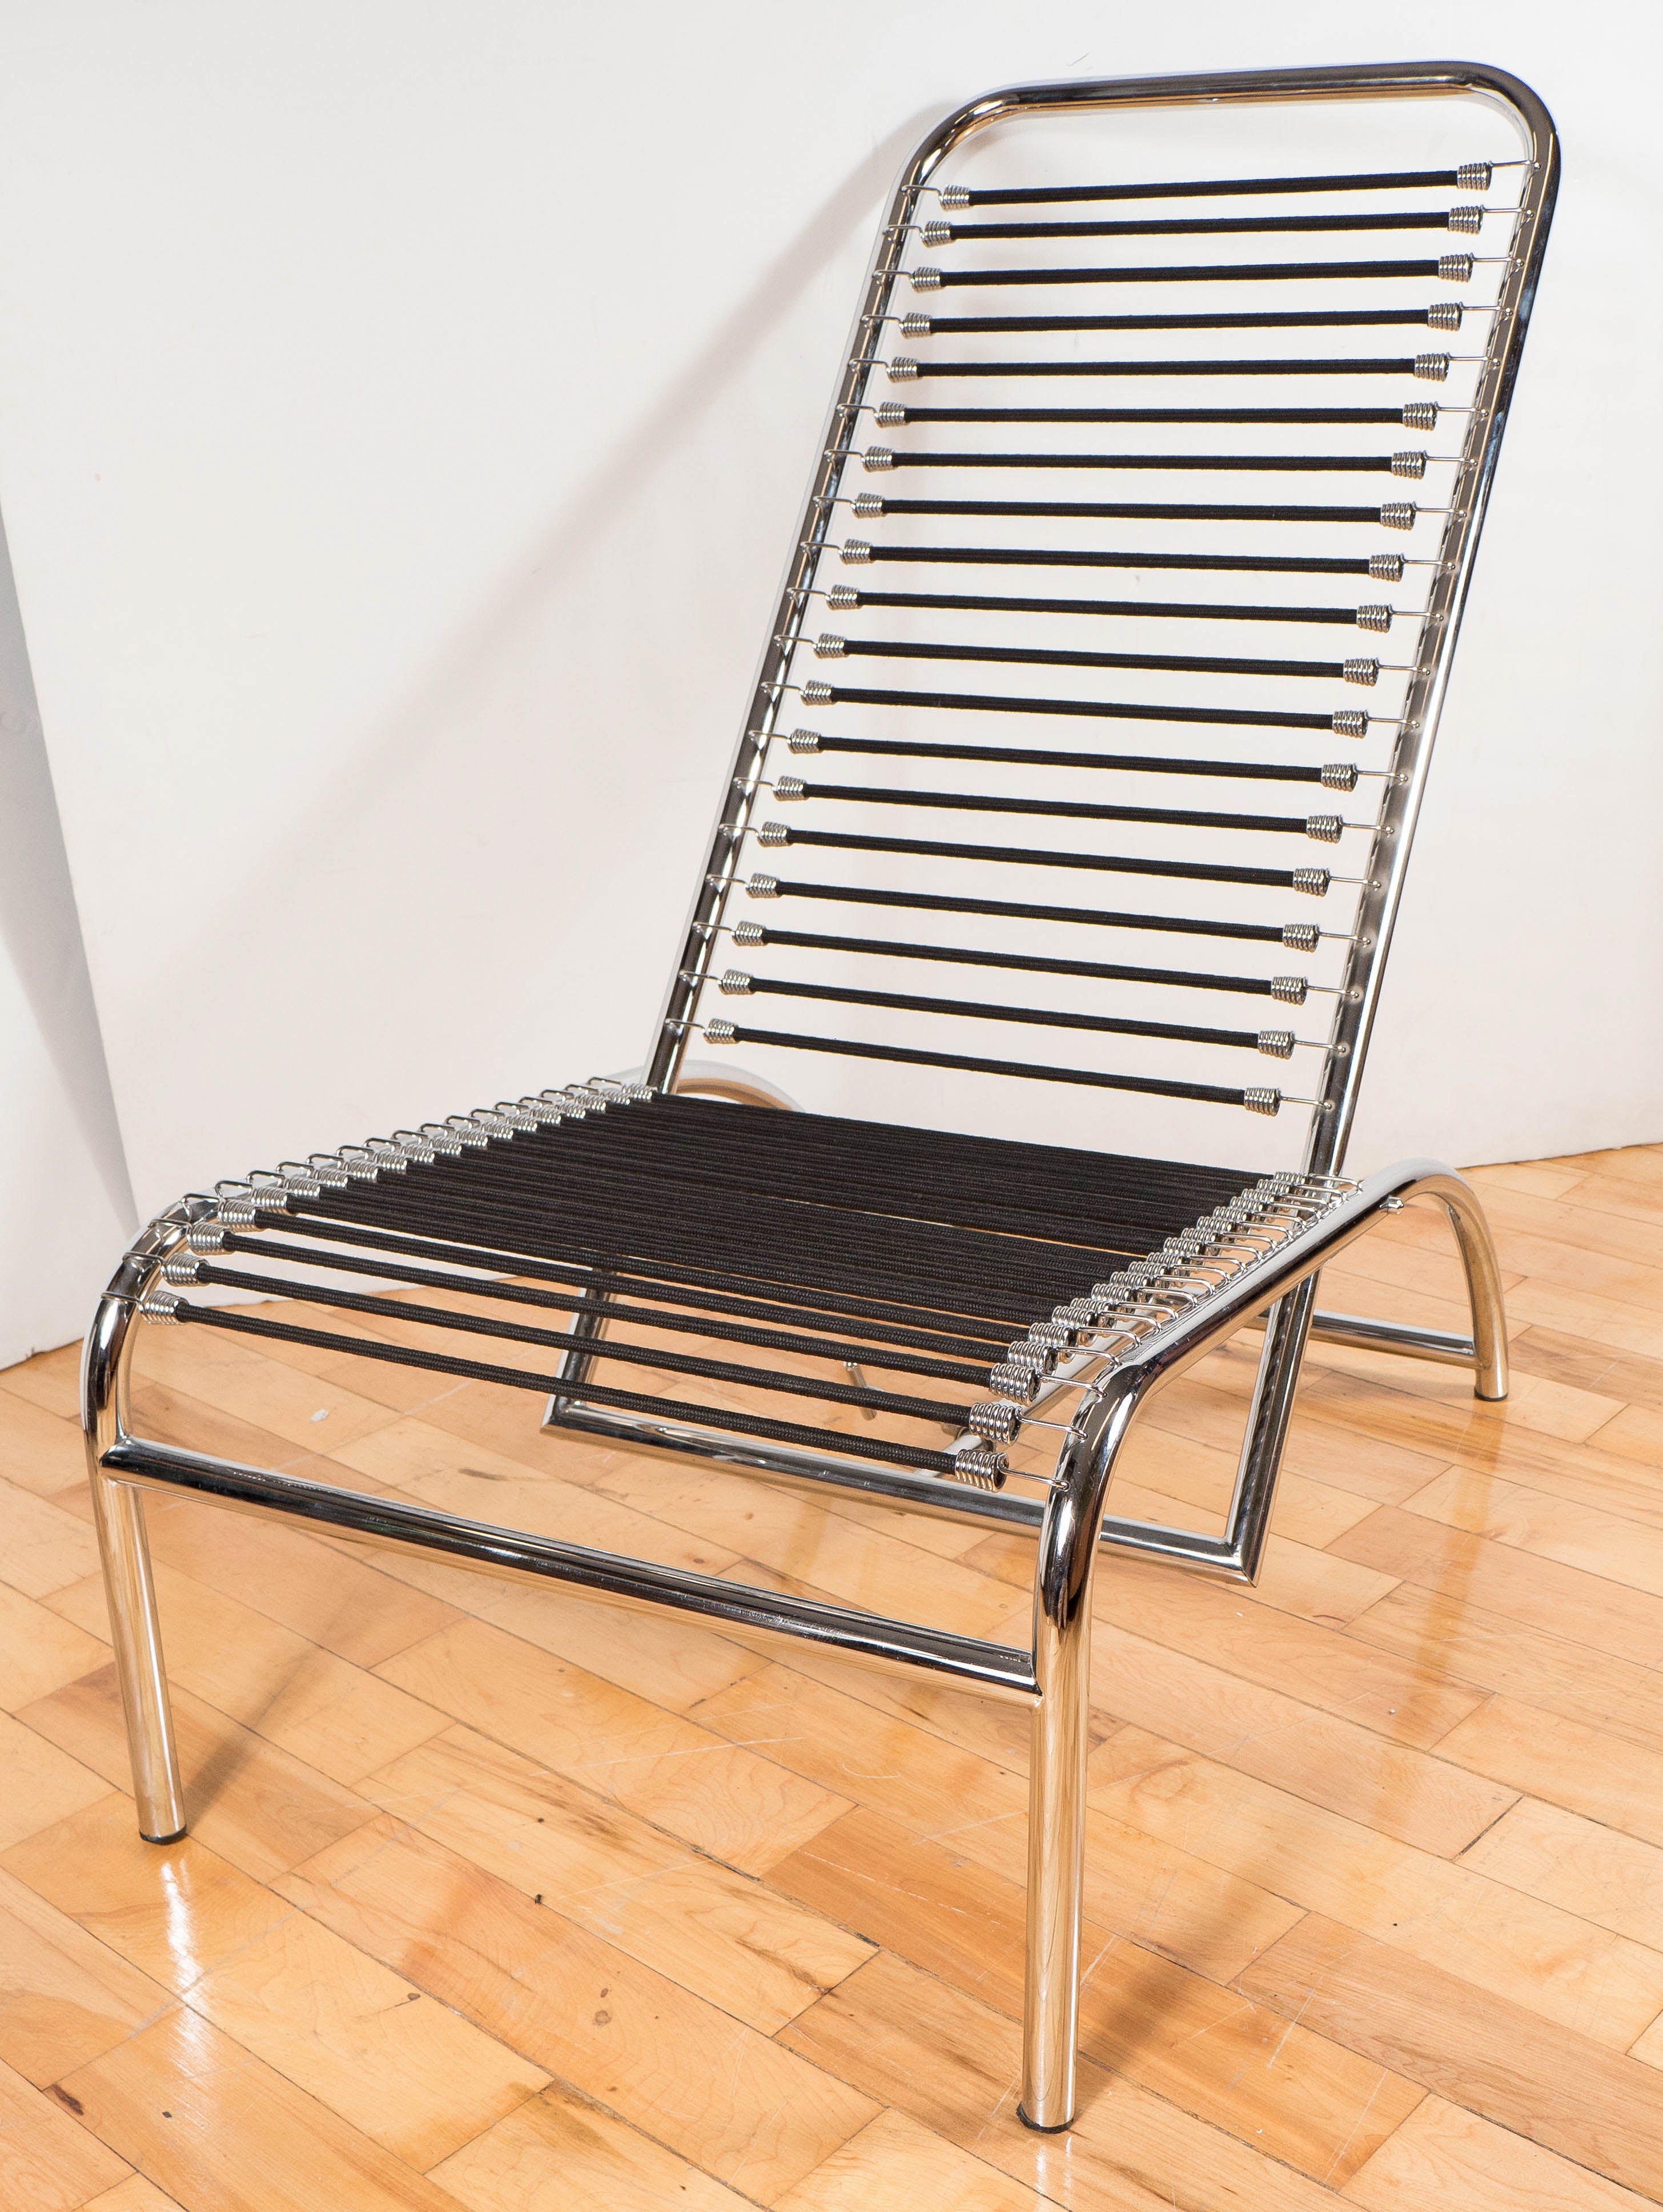 Original Sandows tubular lounge or easy chair by Rene Herbst. A tubular polished aluminum frame and adjustable back, with horizontal attached black bands which serve as supports for both seat and back. This easy chair was originally designed by Rene